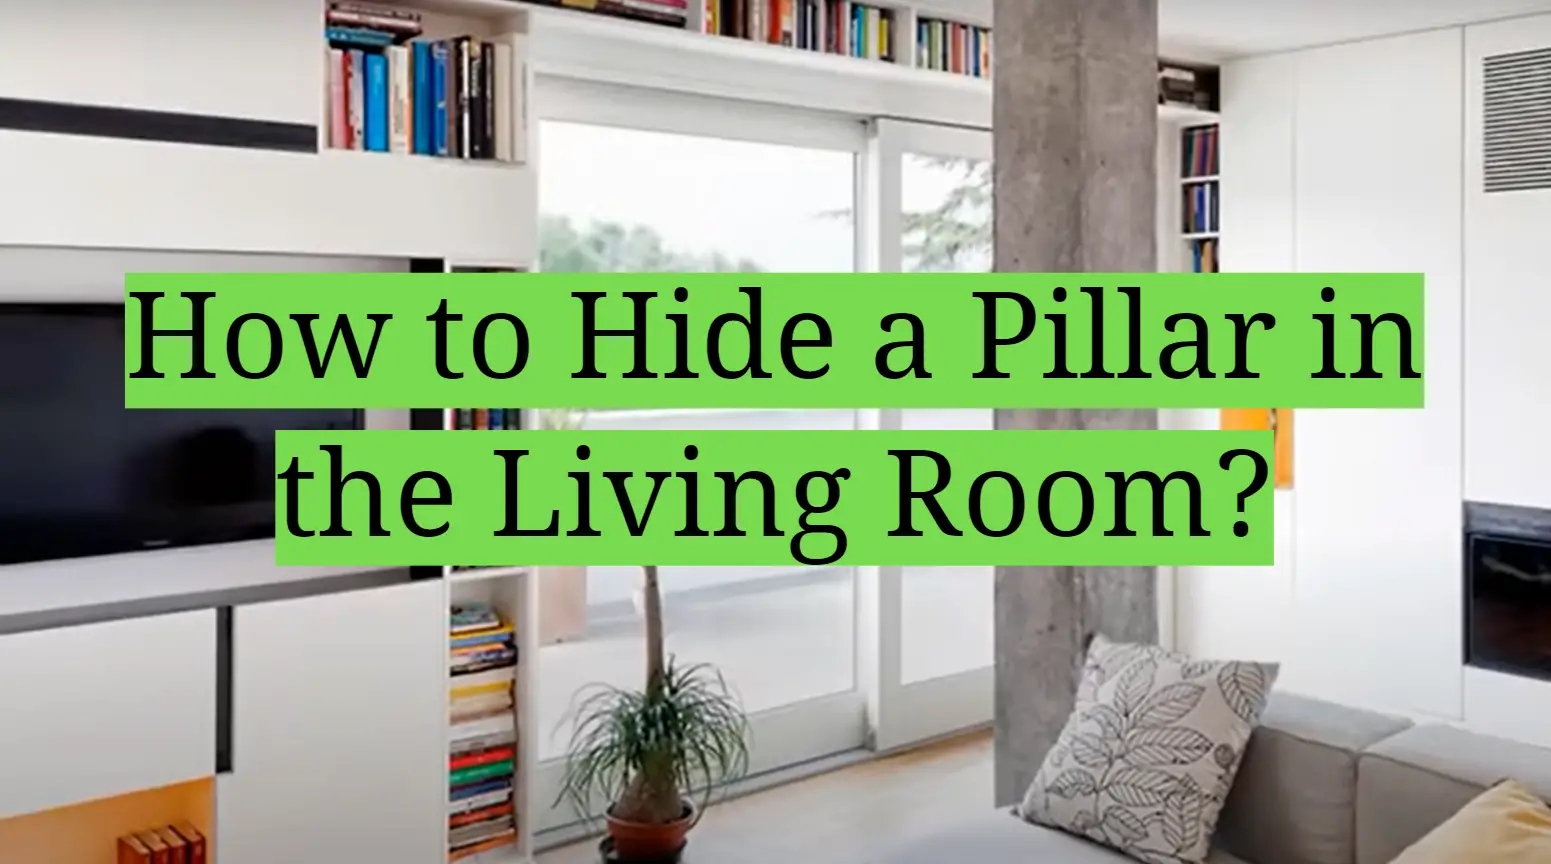 How to Hide a Pillar in the Living Room?